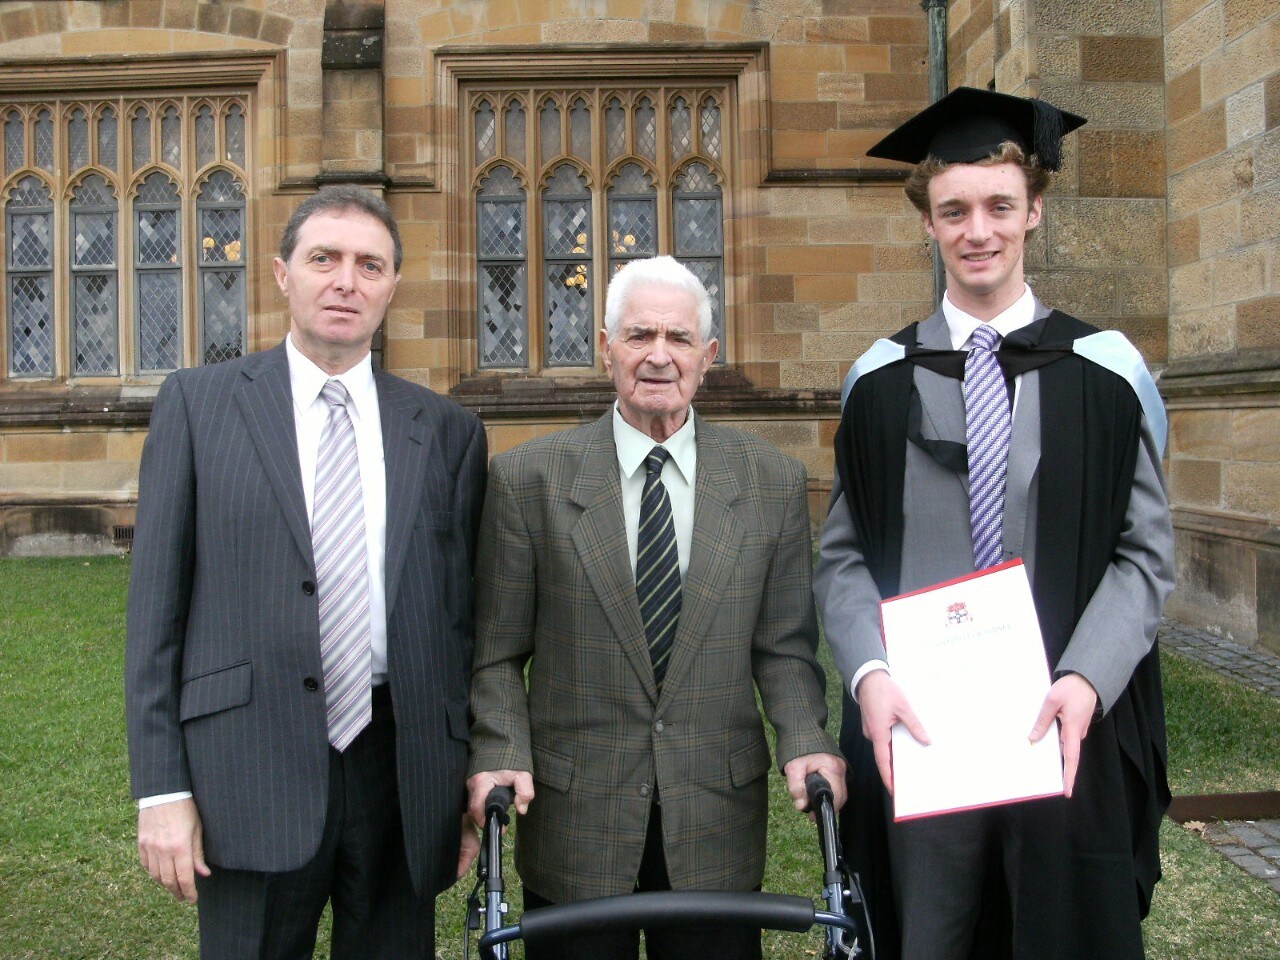 Guy Boncardo stands with his father and his son at his son's University of Sydney graduation ceremony